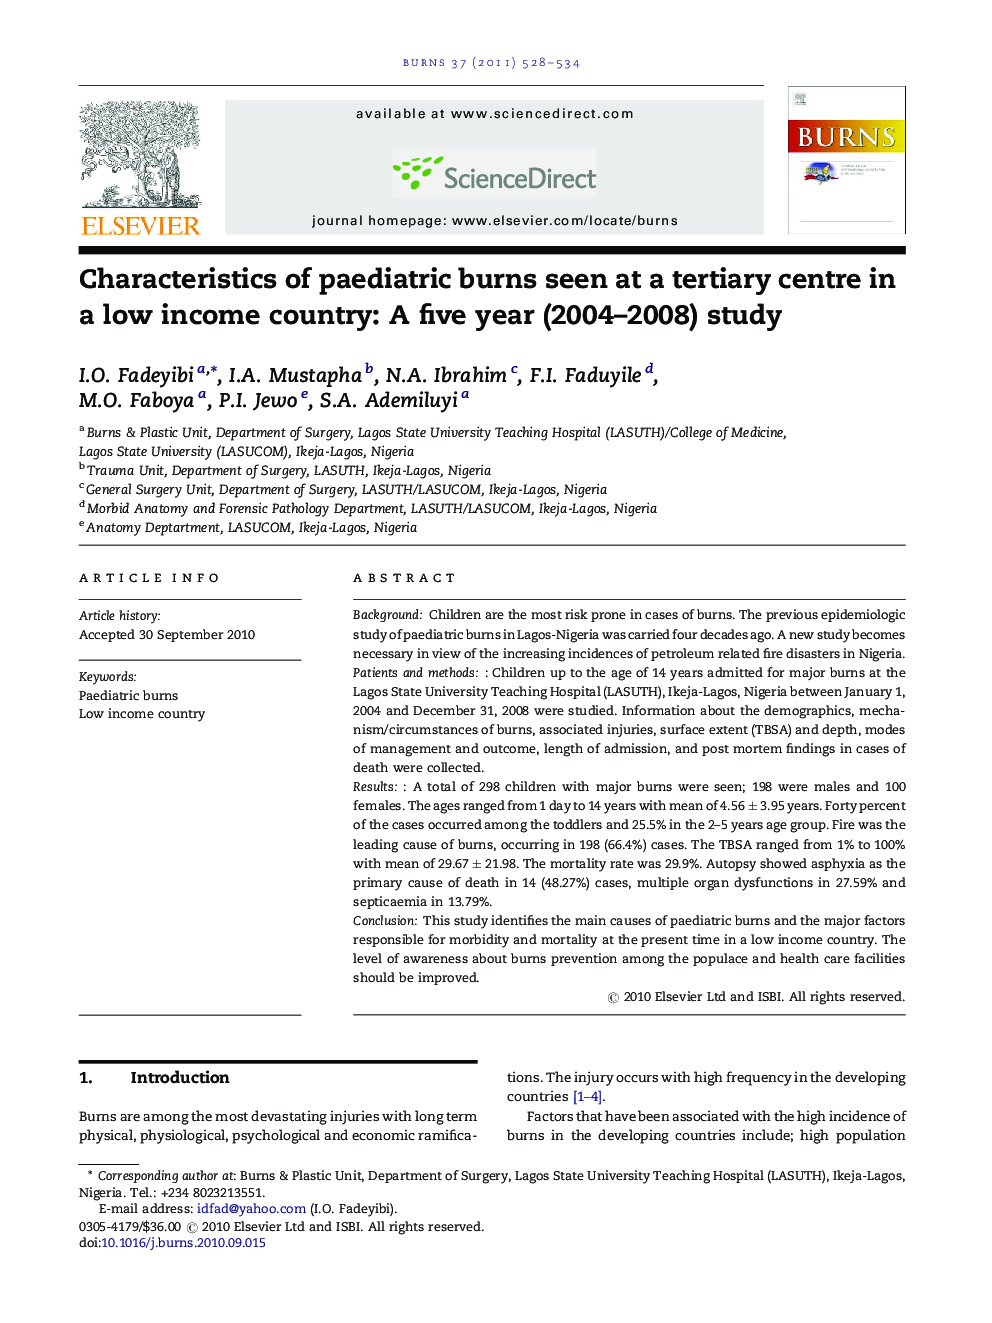 Characteristics of paediatric burns seen at a tertiary centre in a low income country: A five year (2004–2008) study